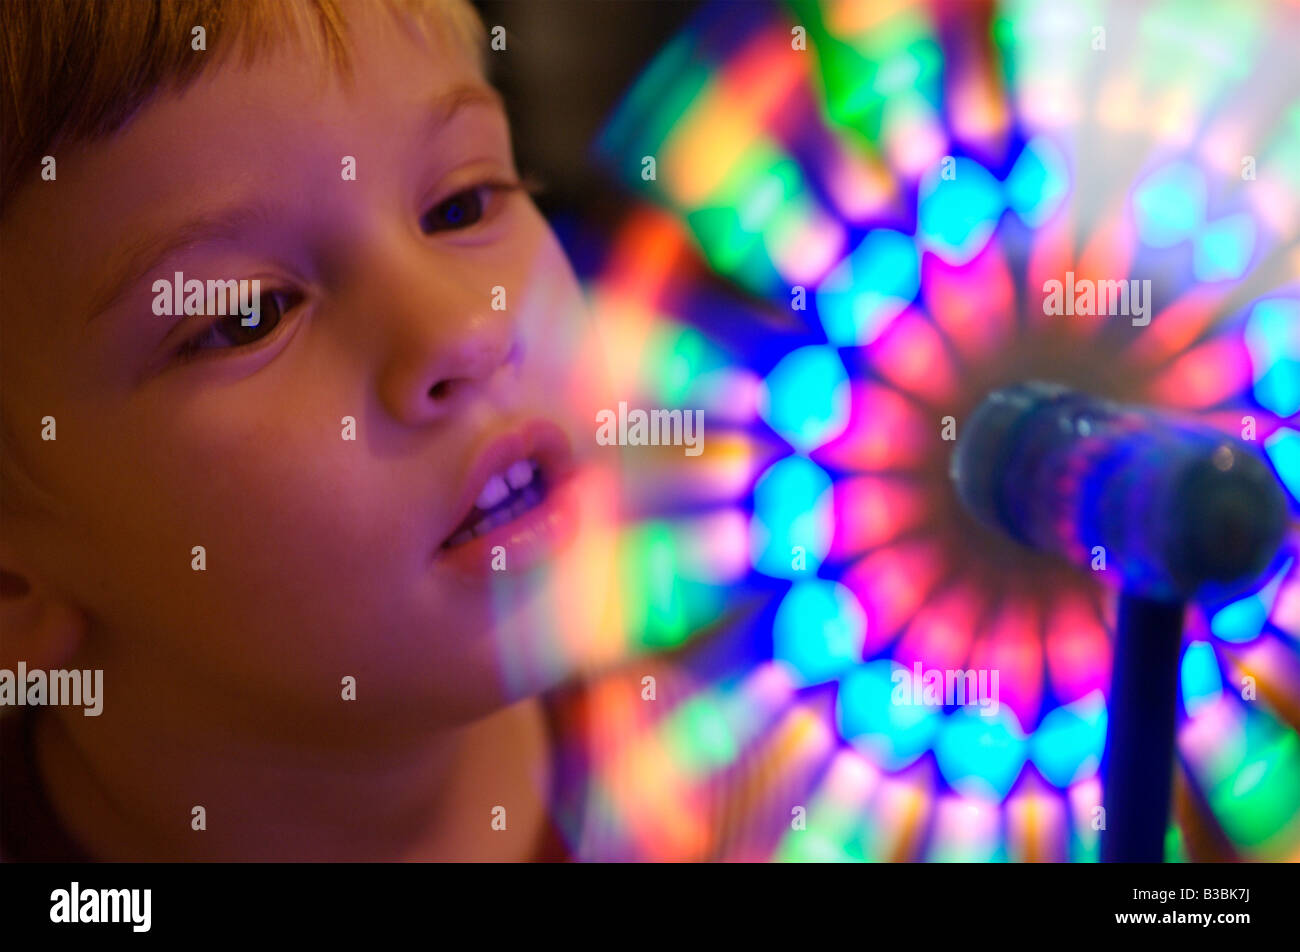 A young boy looking at a spinning colorful wheel Stock Photo